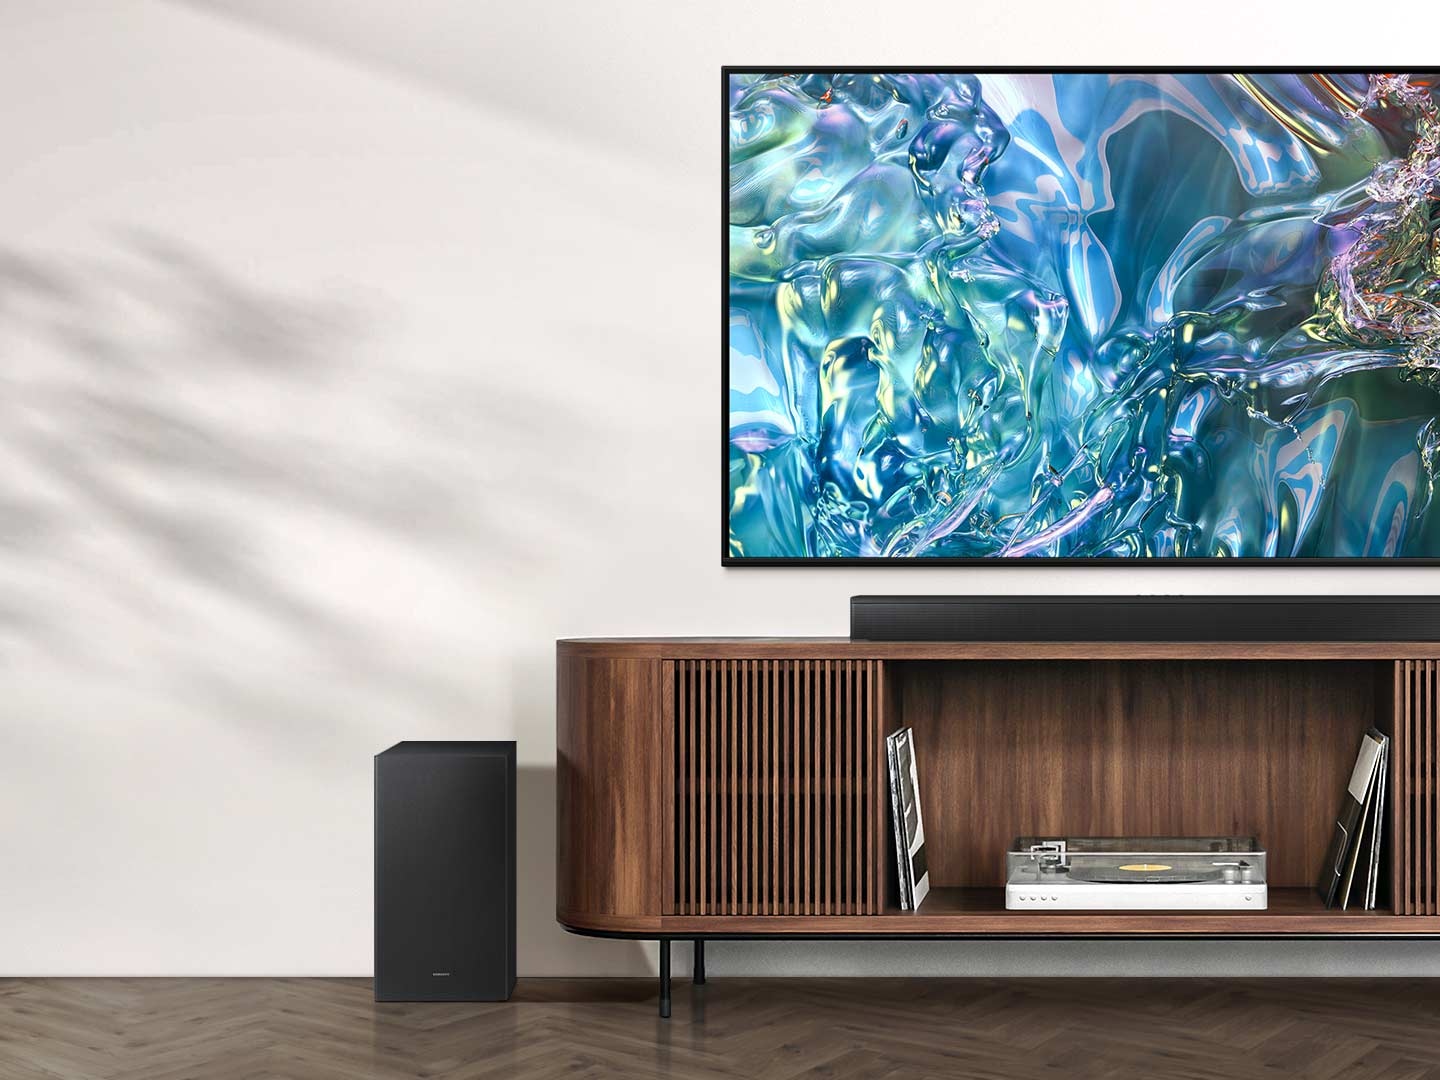 A TV shows a blue wave pattern on its screen. Underneath is a TV stand with a Soundbar on top and a subwoofer to the side.